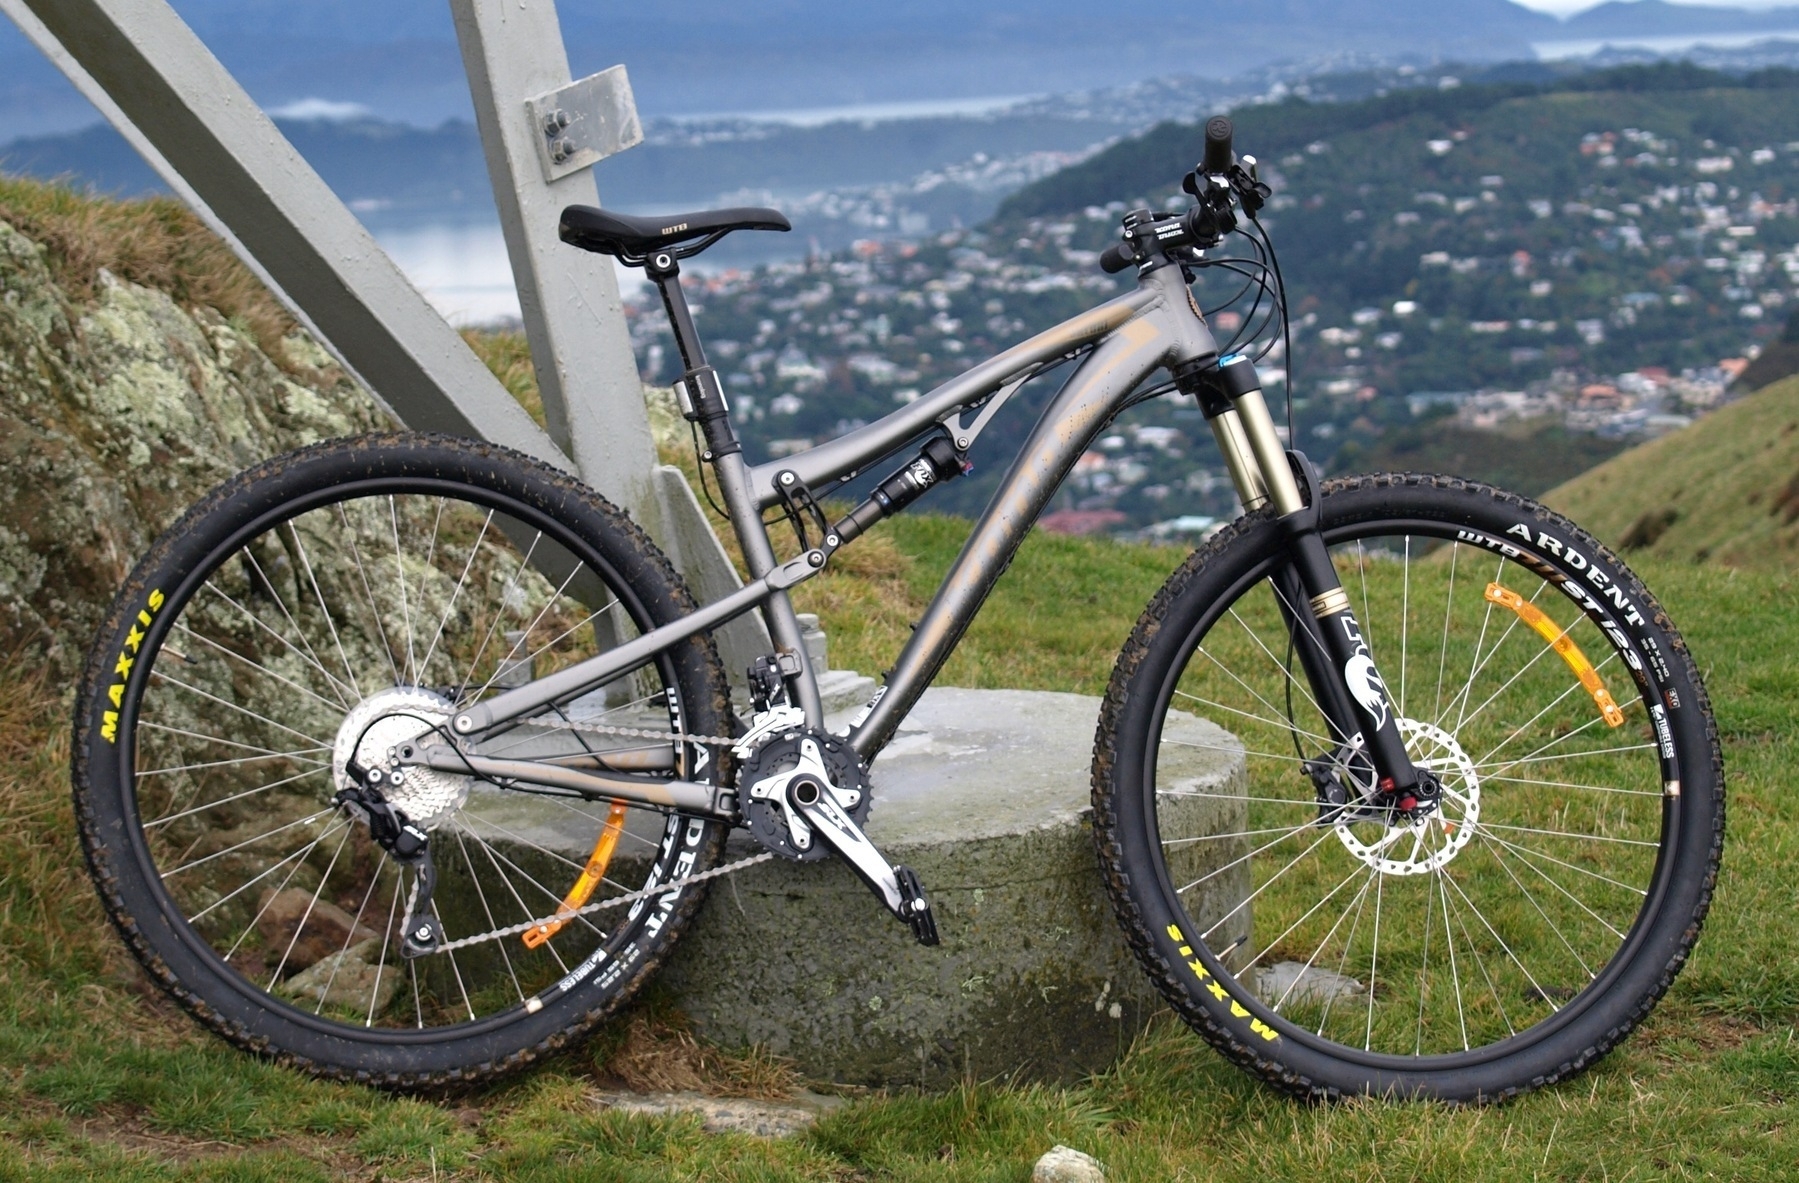 A new and shiny dual suspension mountain bike leans against a power pylon.